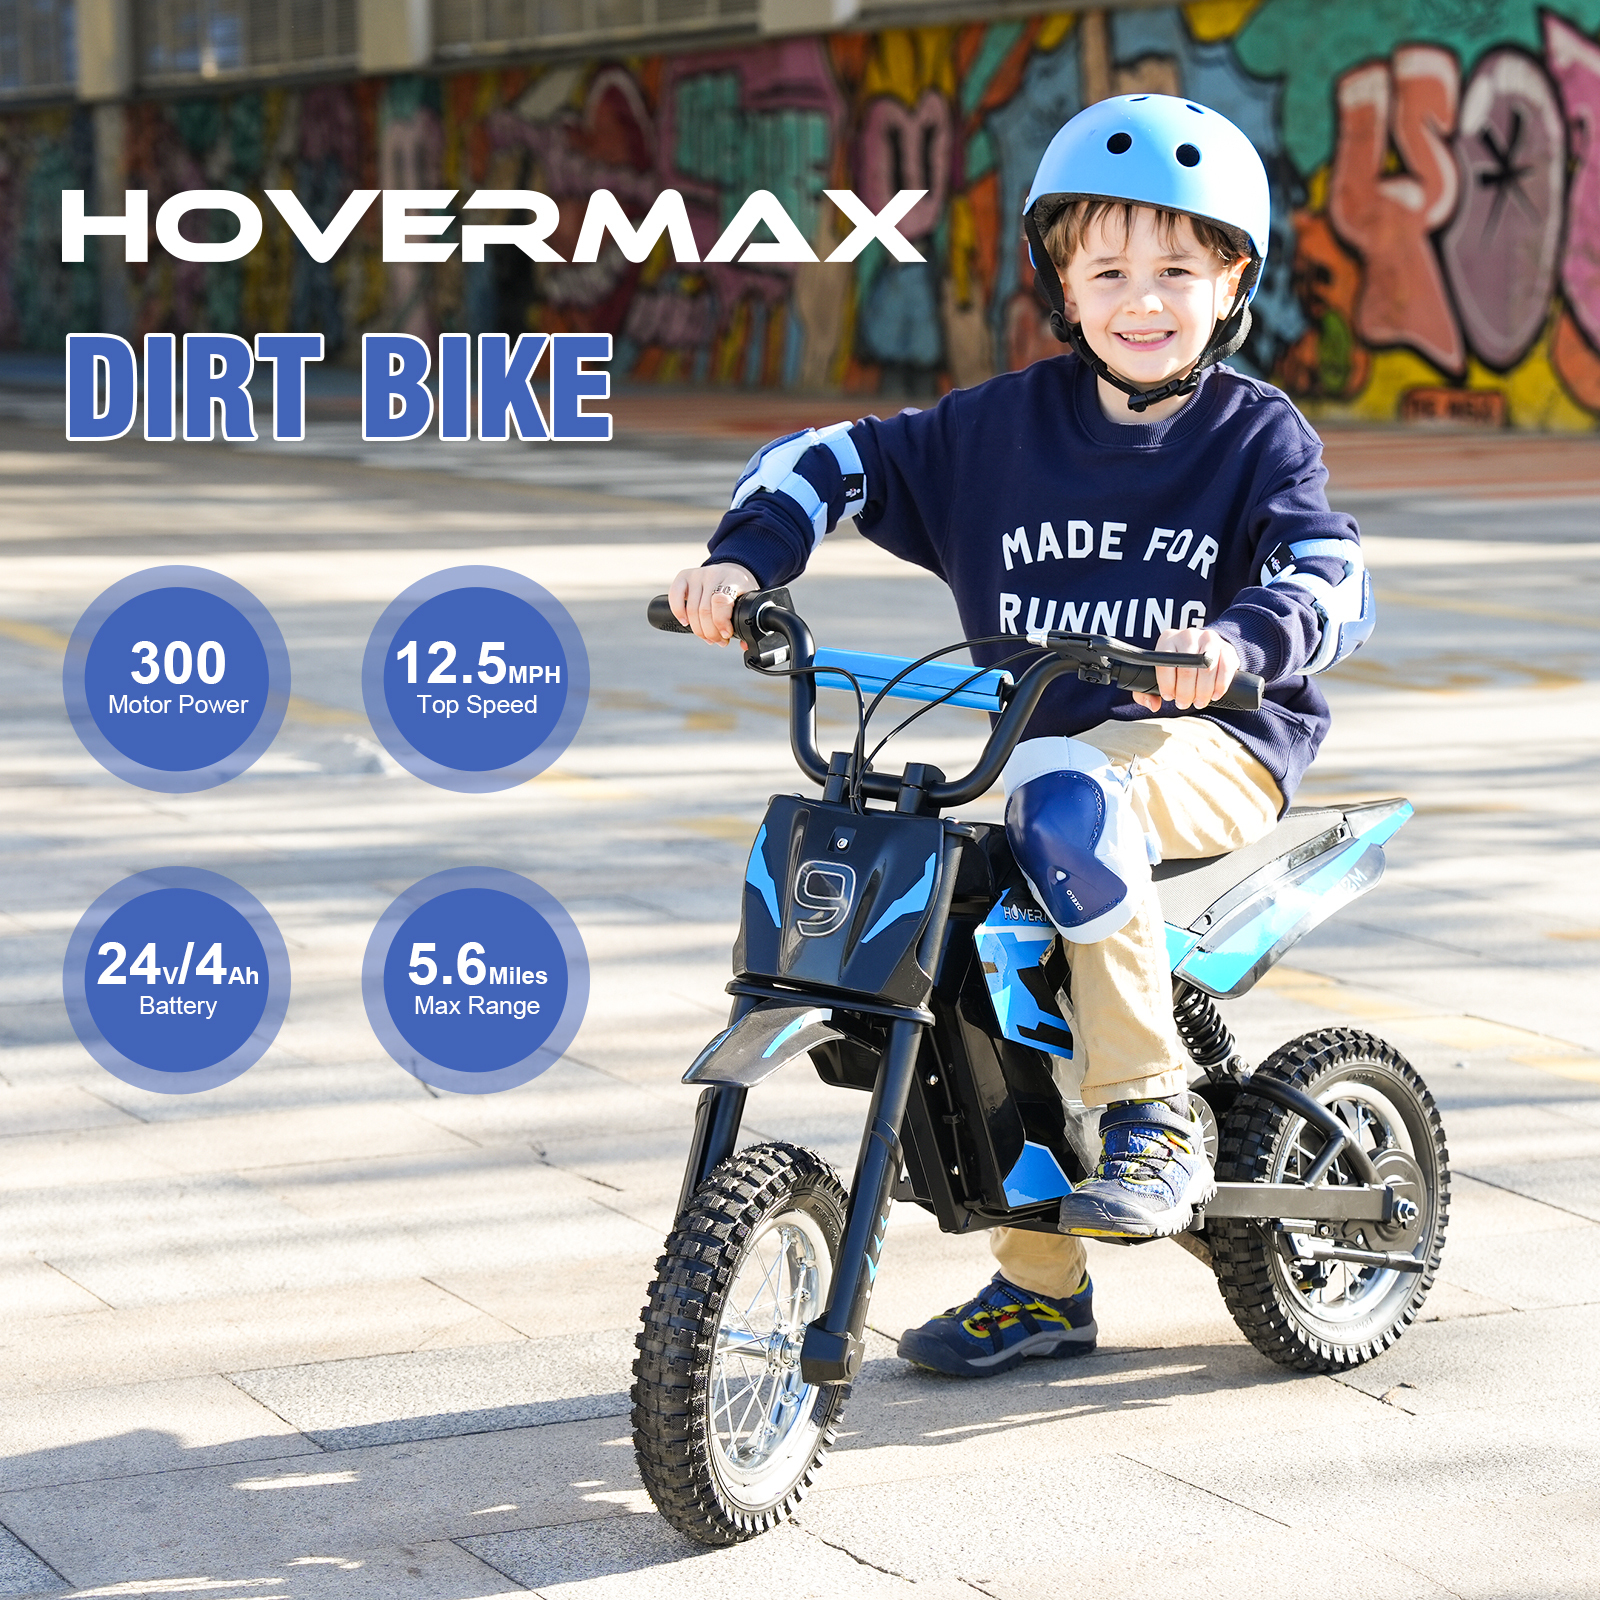 HOVERMAX H12M 24V Electric Dirt Bike, 300W Electric Motorcycle 12.5MPH Max Speed, Ride On Toys motocross for Kids Teens, Blue - image 2 of 8